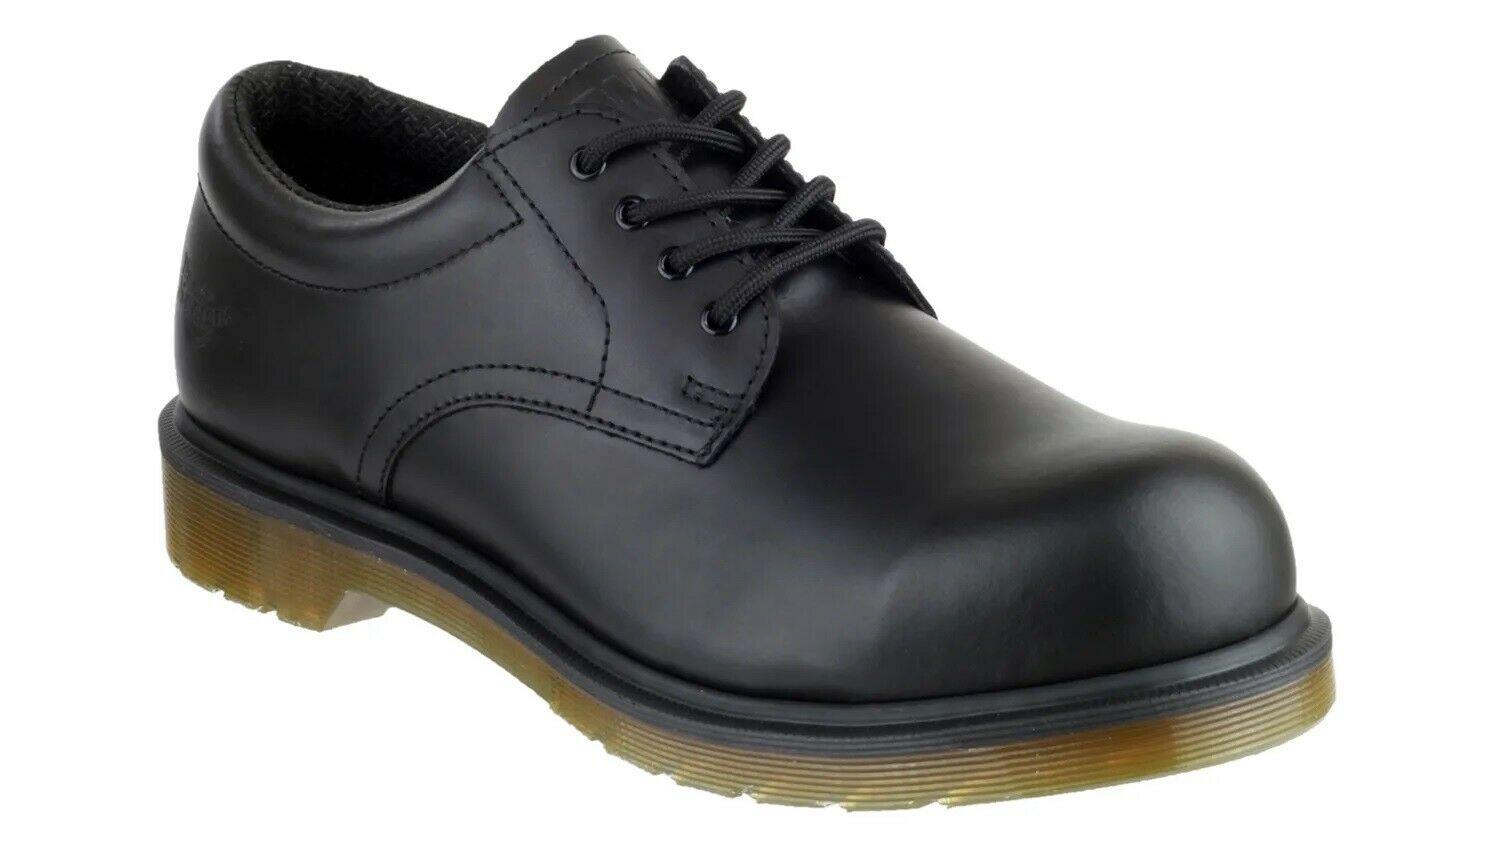 Dr Martens Icon 2216 SB black leather steel toe cap work safety shoes